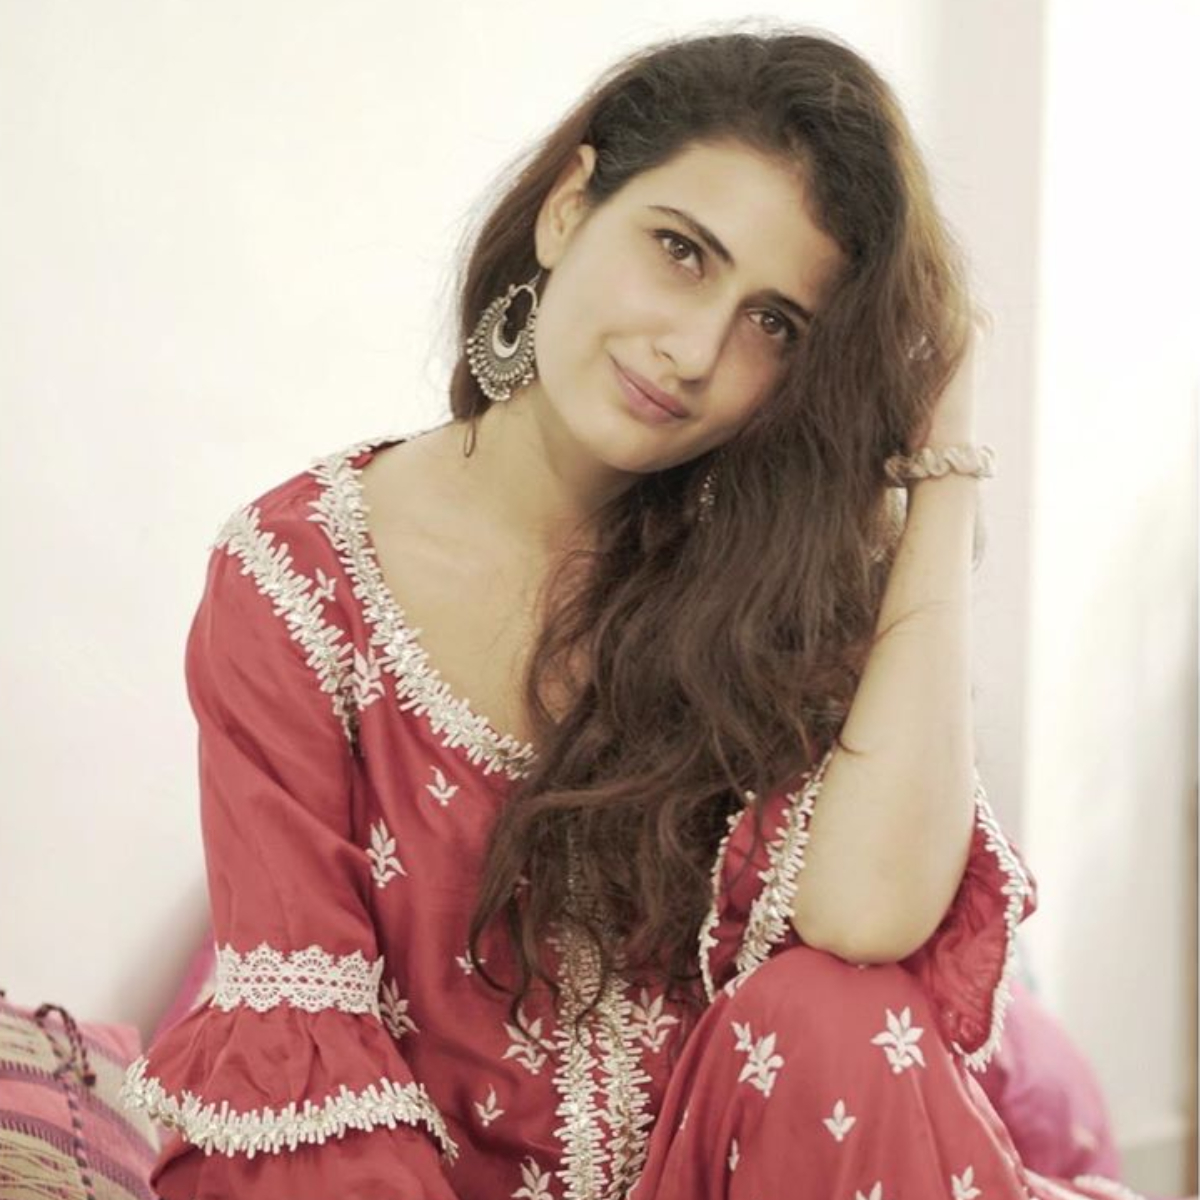 EXCLUSIVE: Fatima Sana Shaikh's SHOCKING confession on facing sexual abuse as a kid & battling casting couch